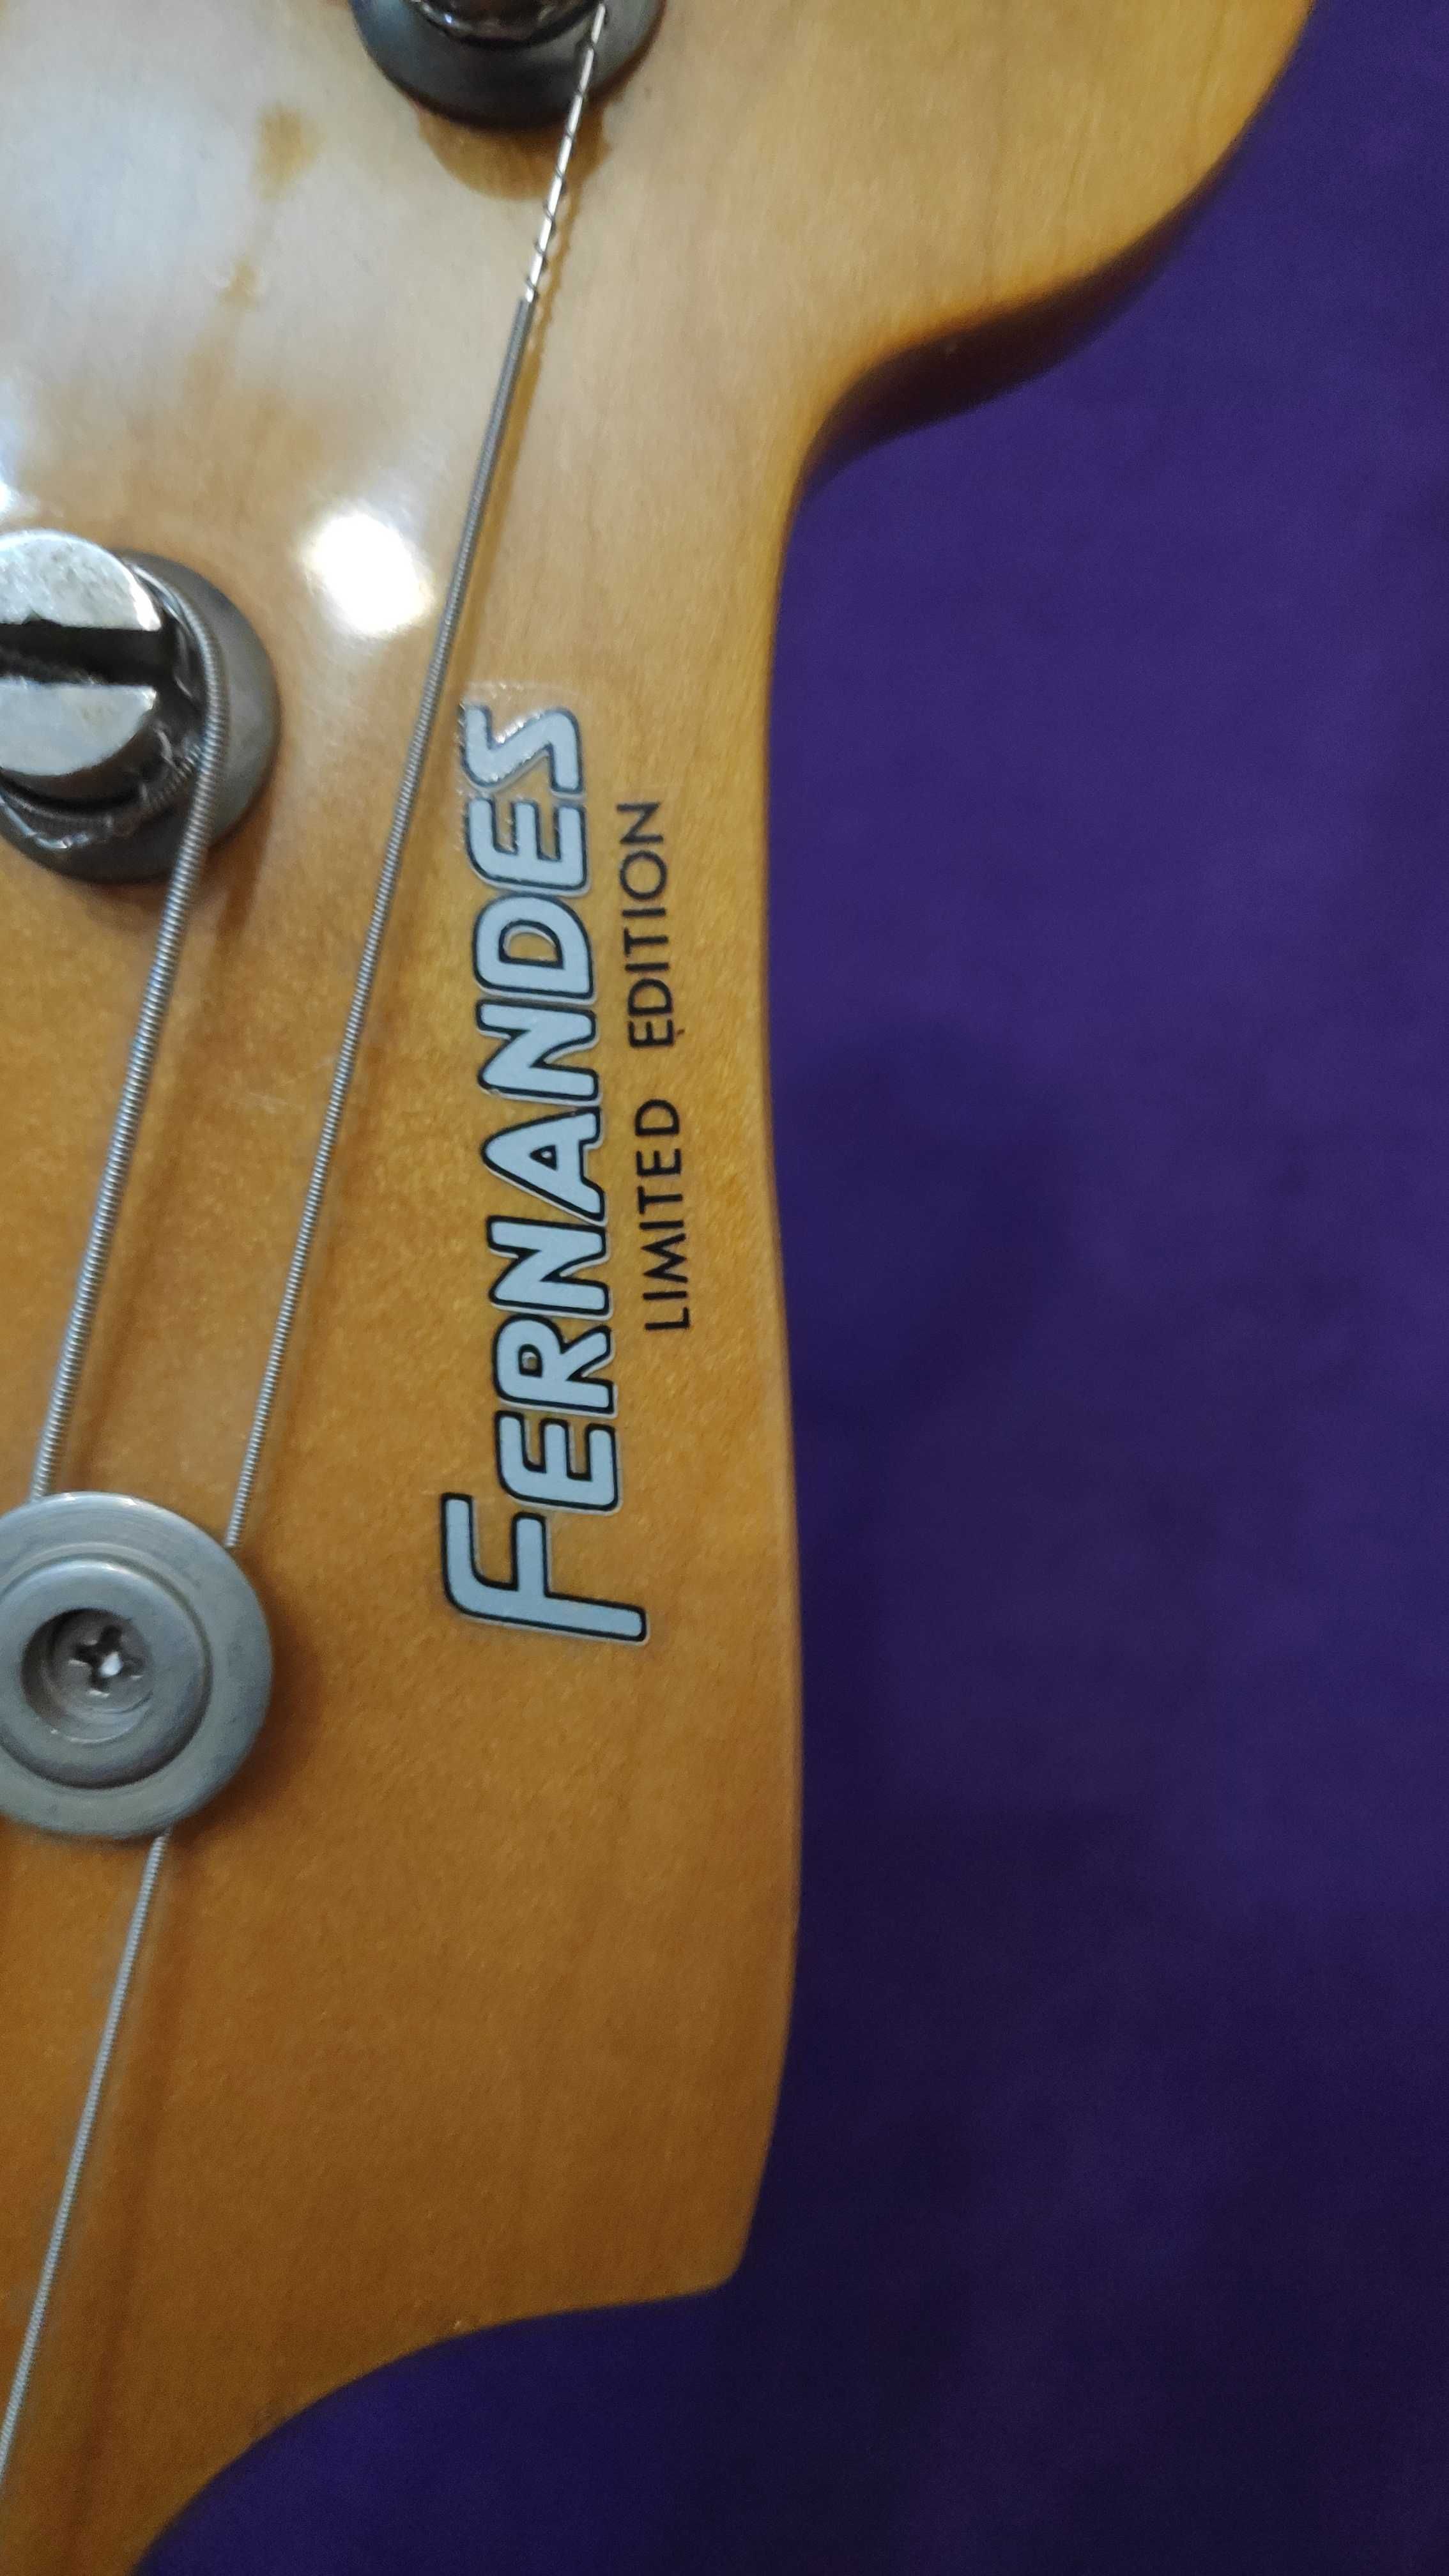 Fernandes Precision Bass Limited Edition